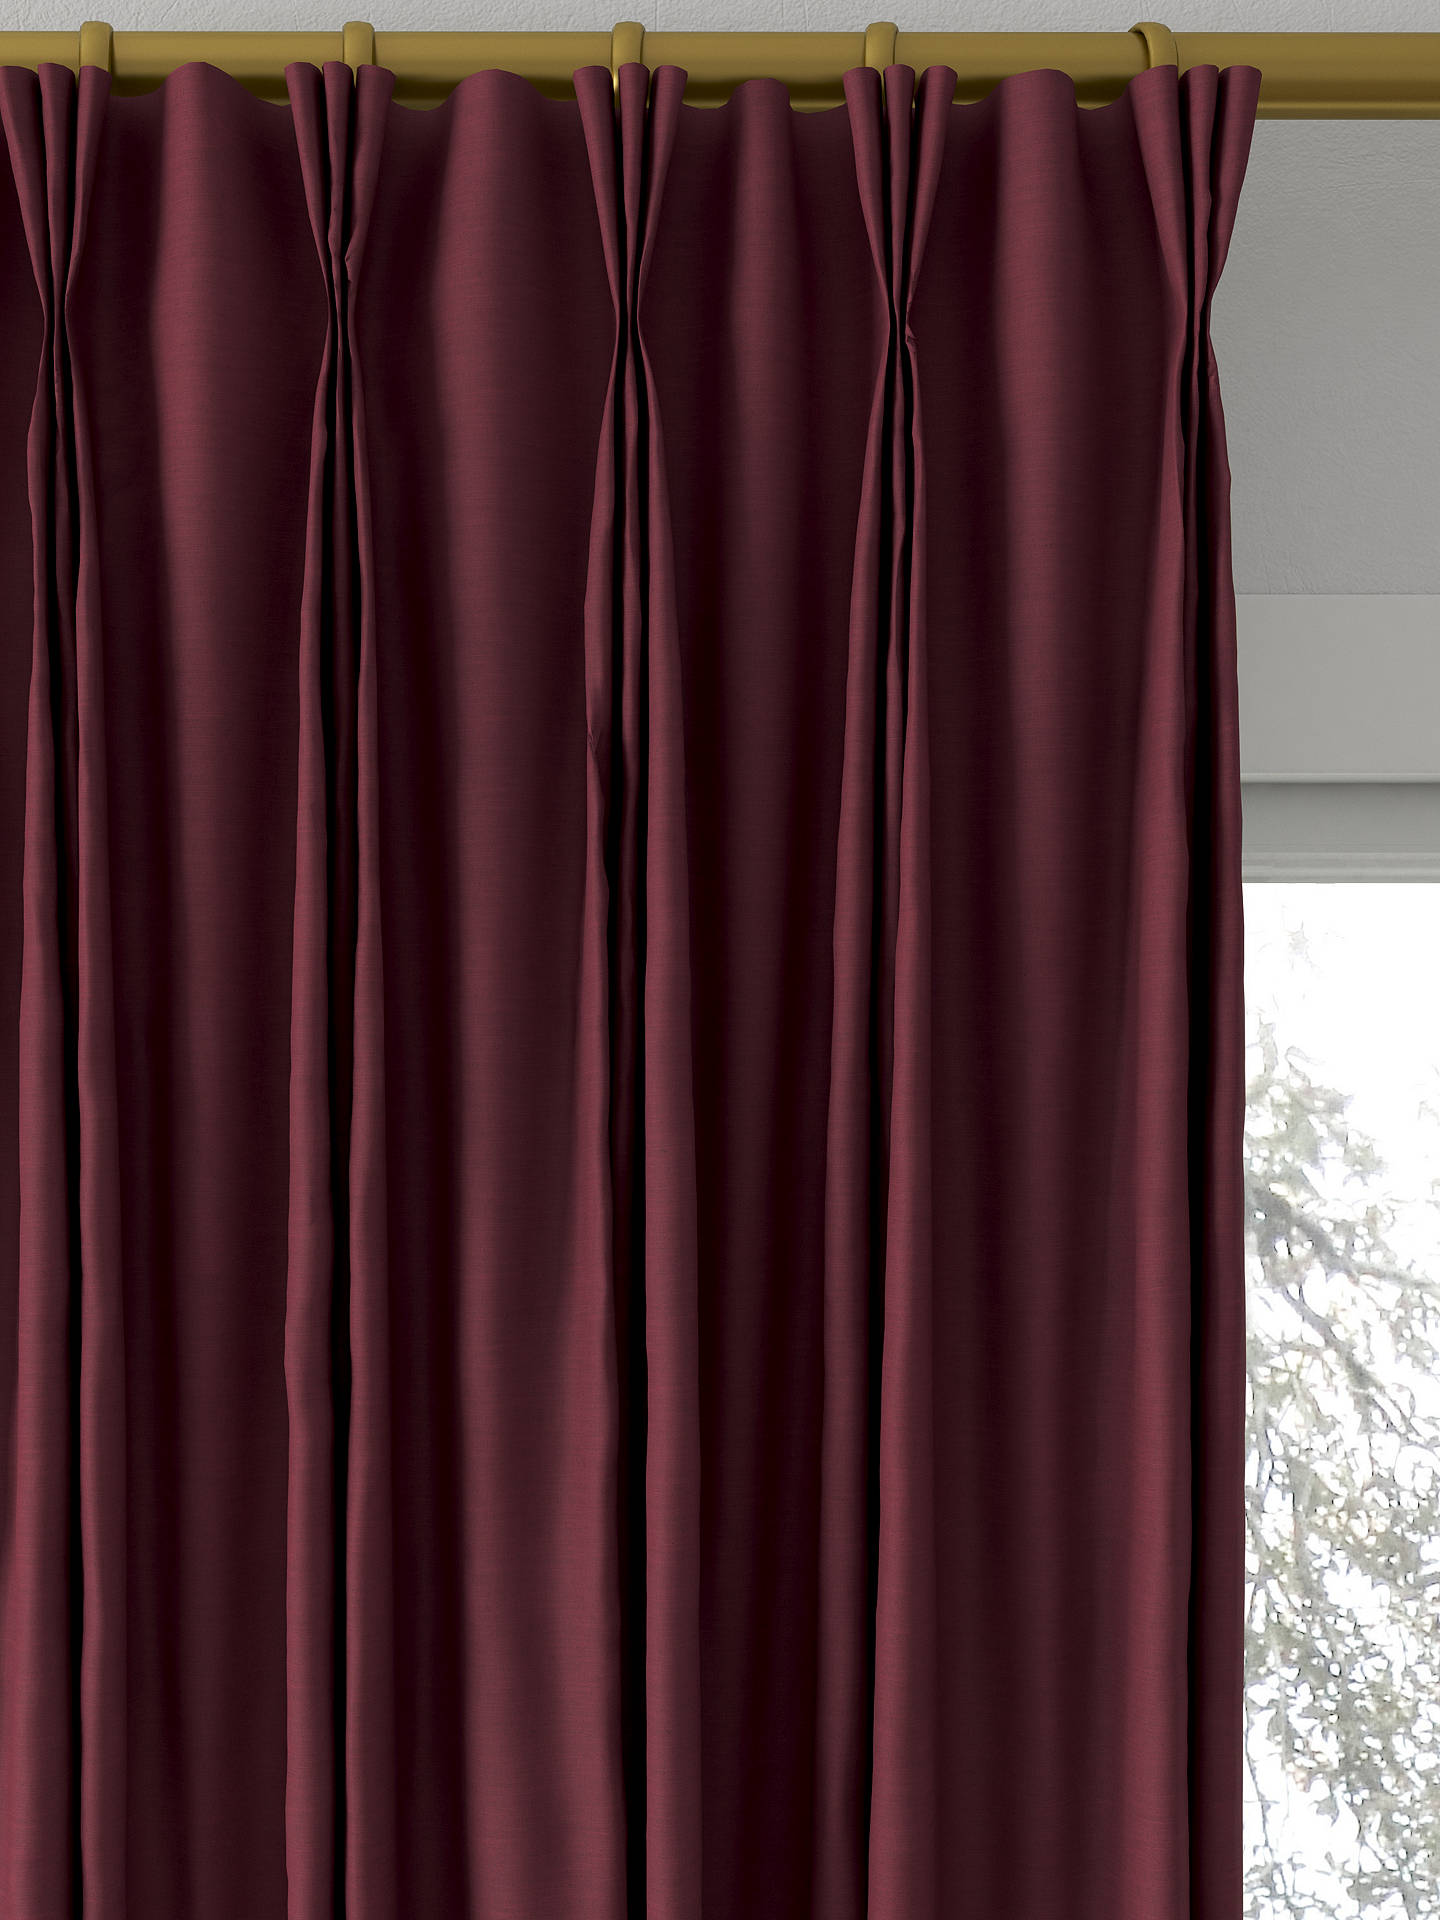 Laura Ashley Swanson Made to Measure Curtains, Dark Cranberry